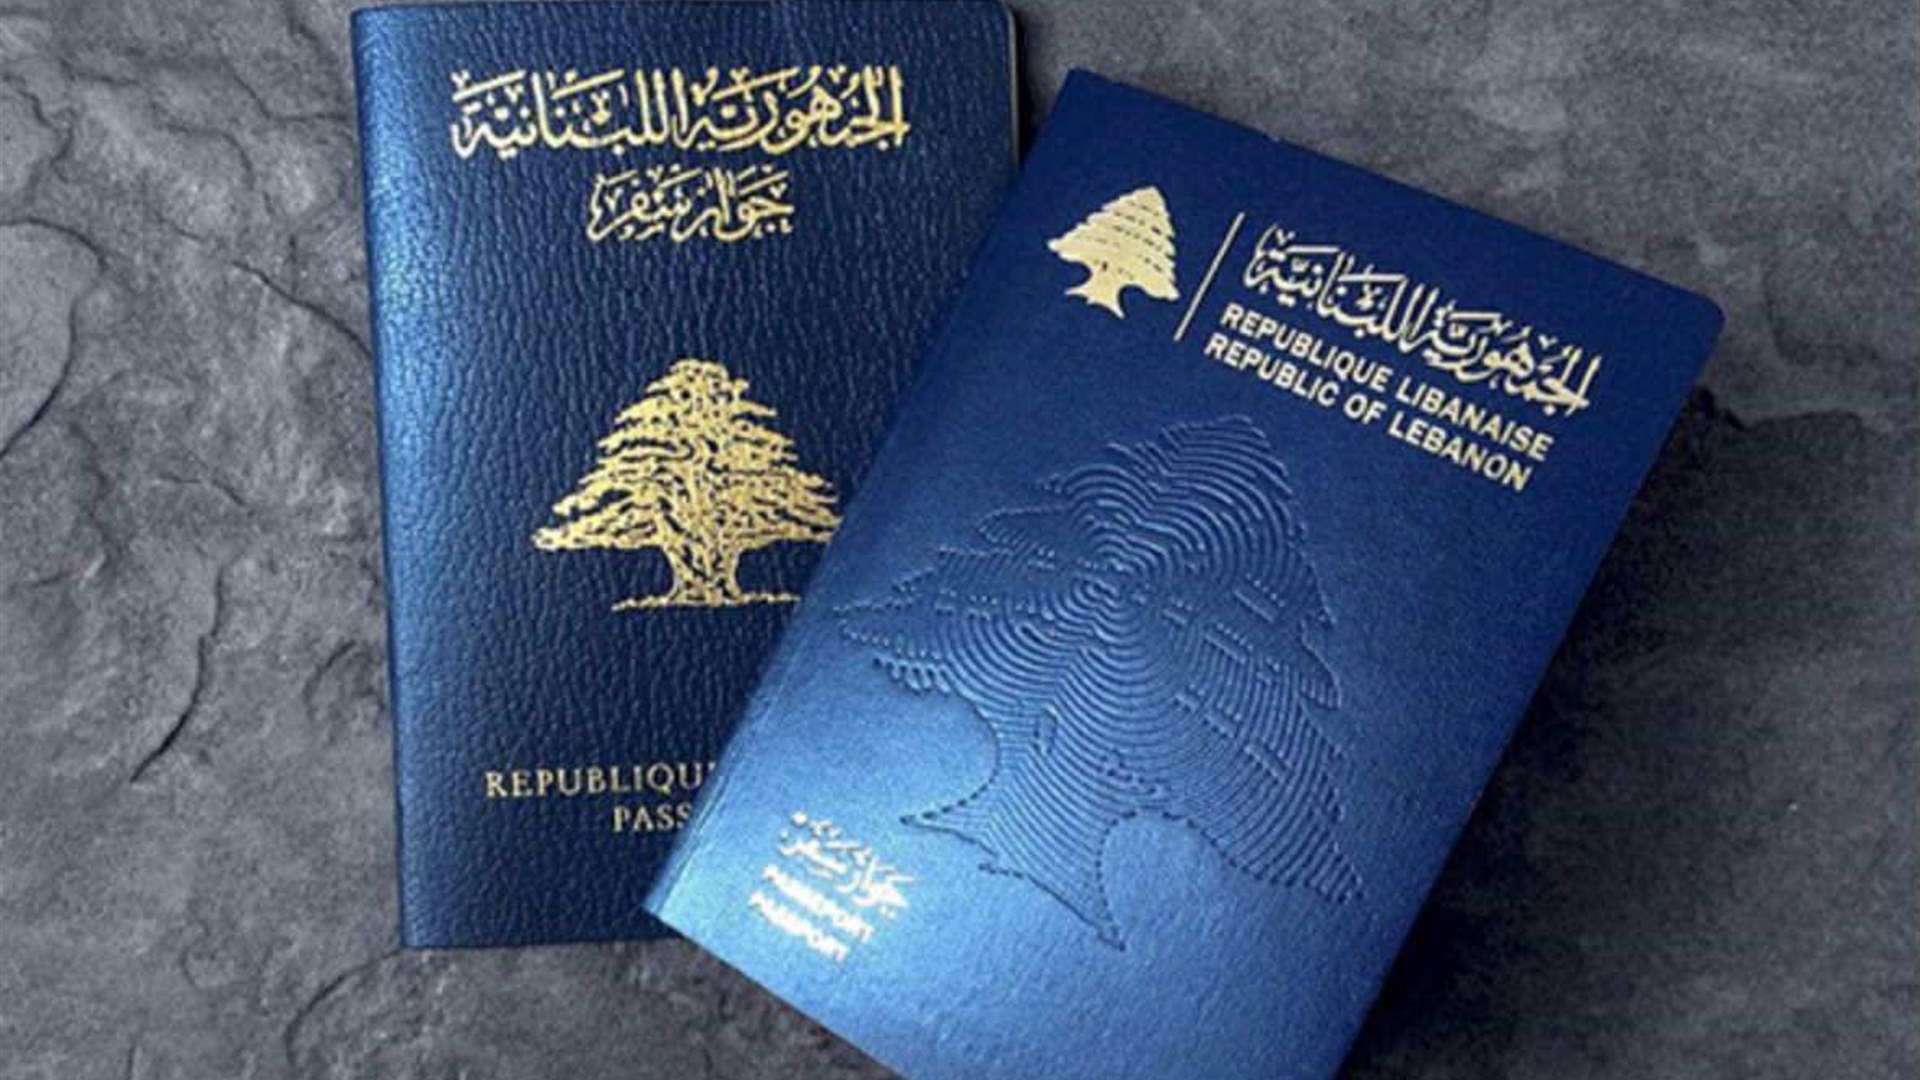 Passport applications to be accepted without appointments as of March 6: General Security